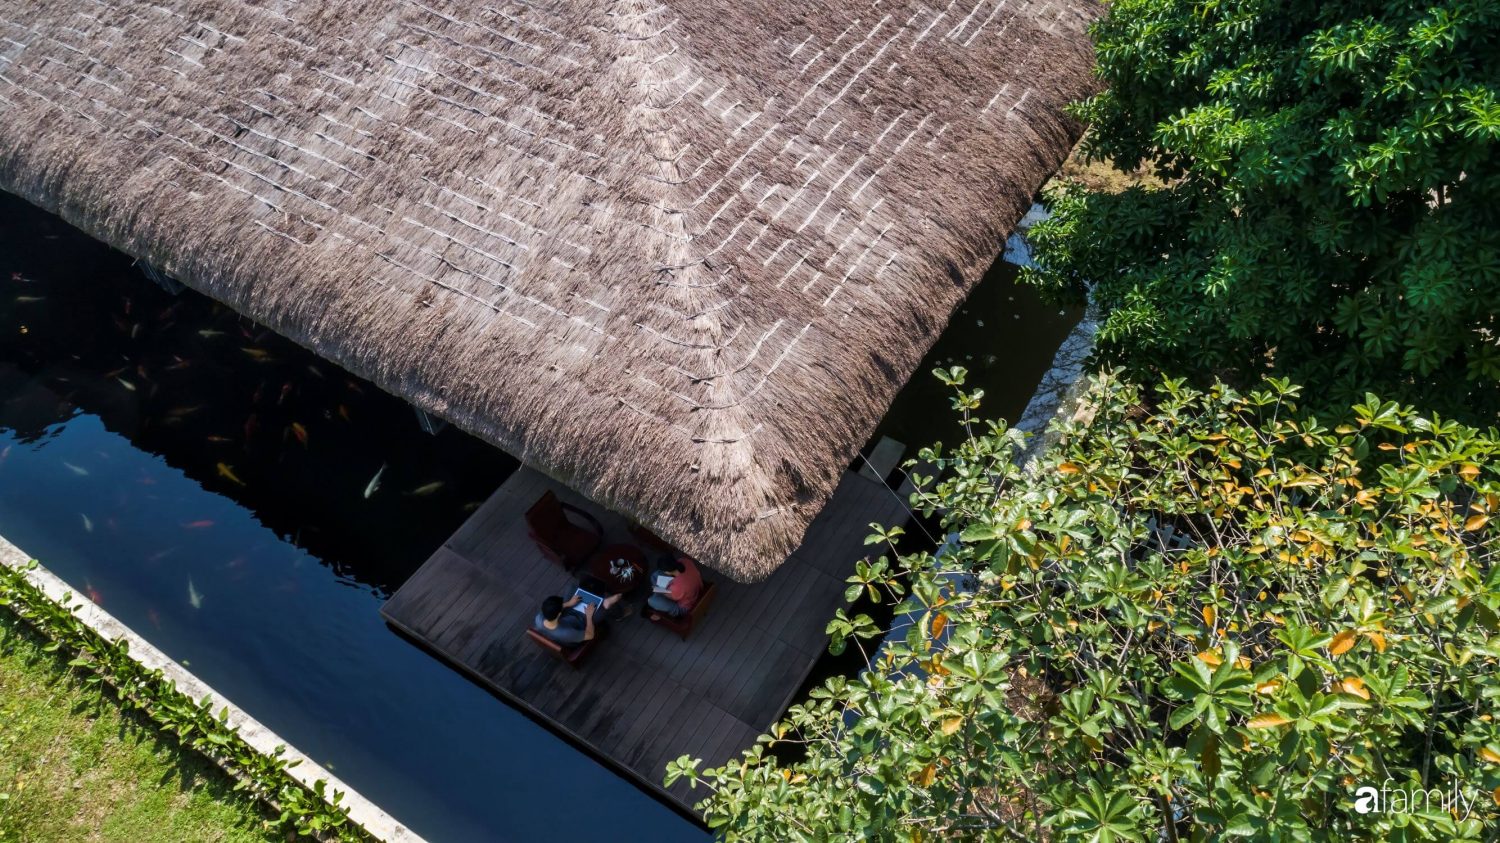 Am House | Garden House with Thatched Roof in Vietnam